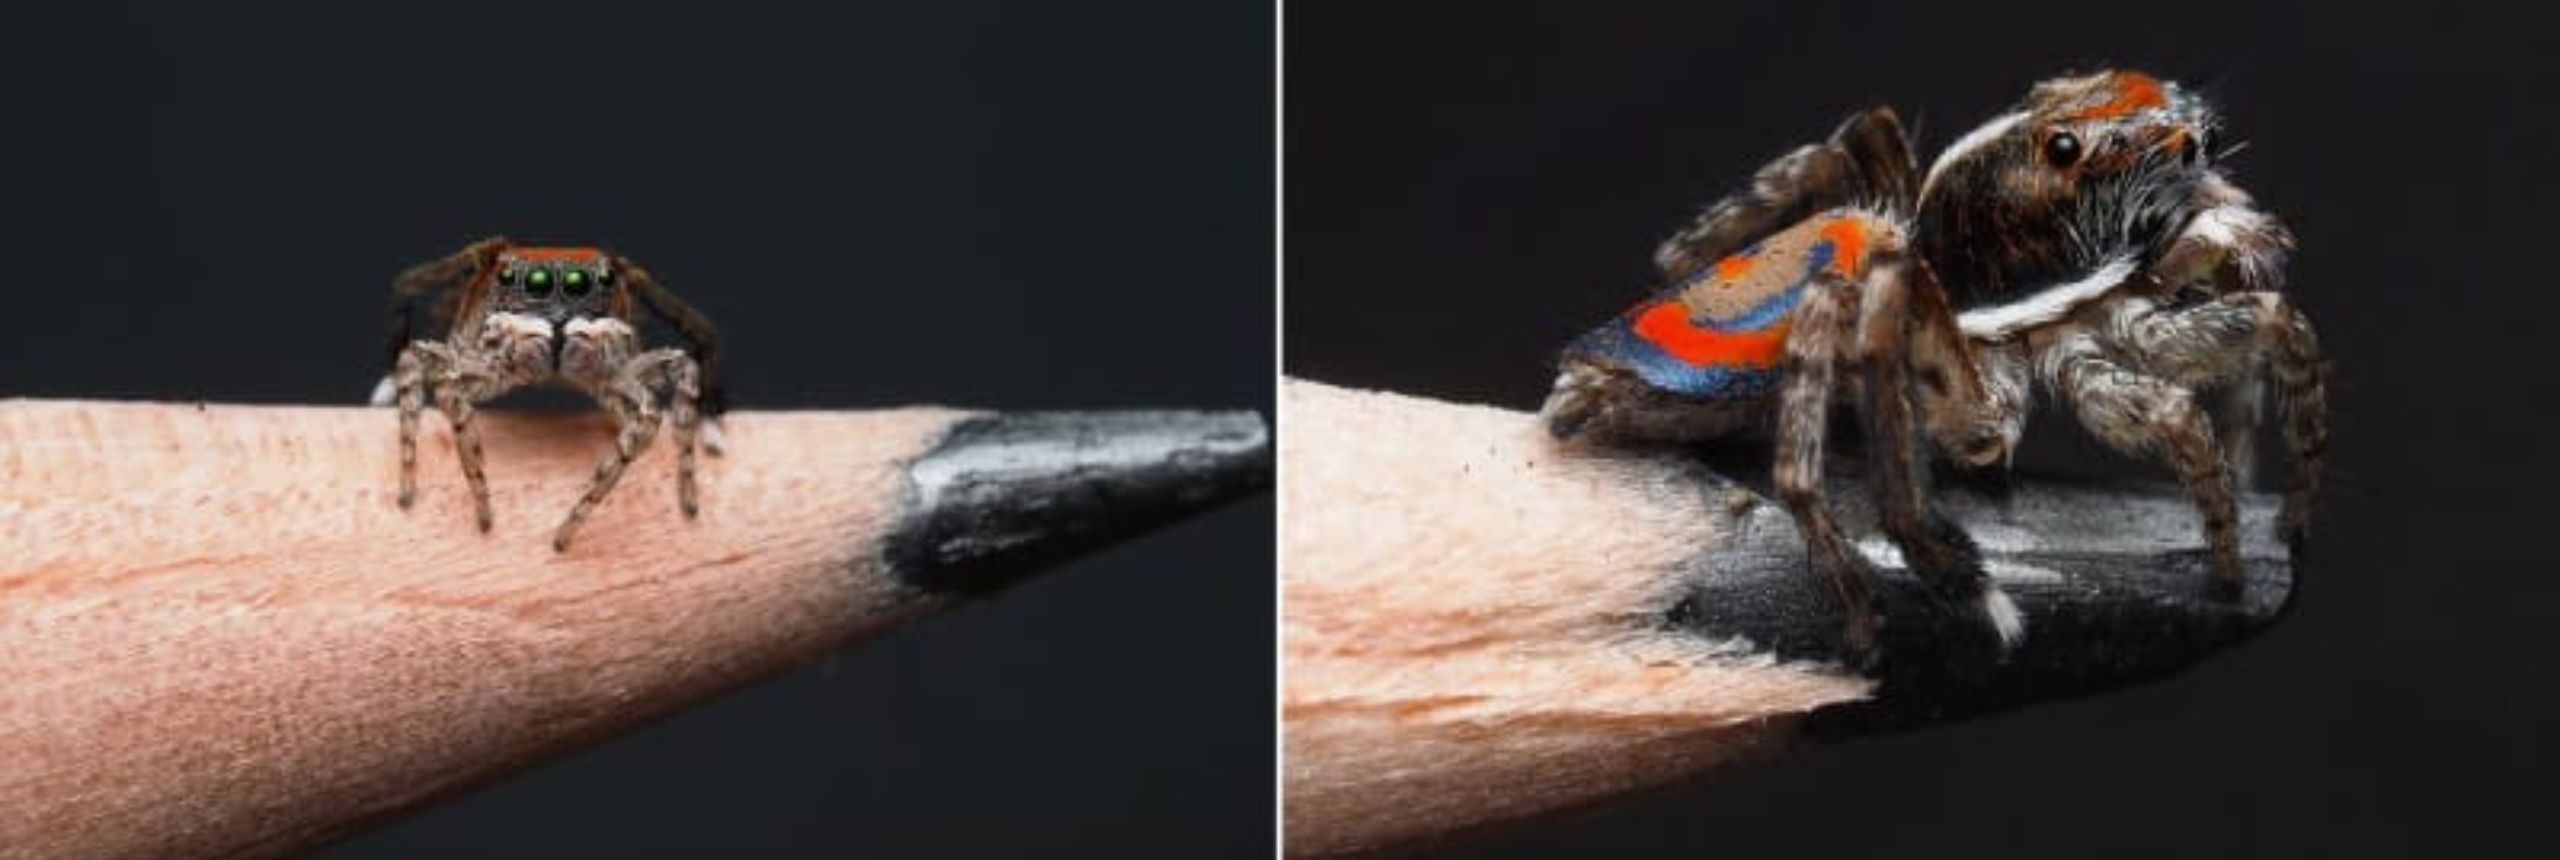 Spiders that look like lollies and have eyes on their belly image 1